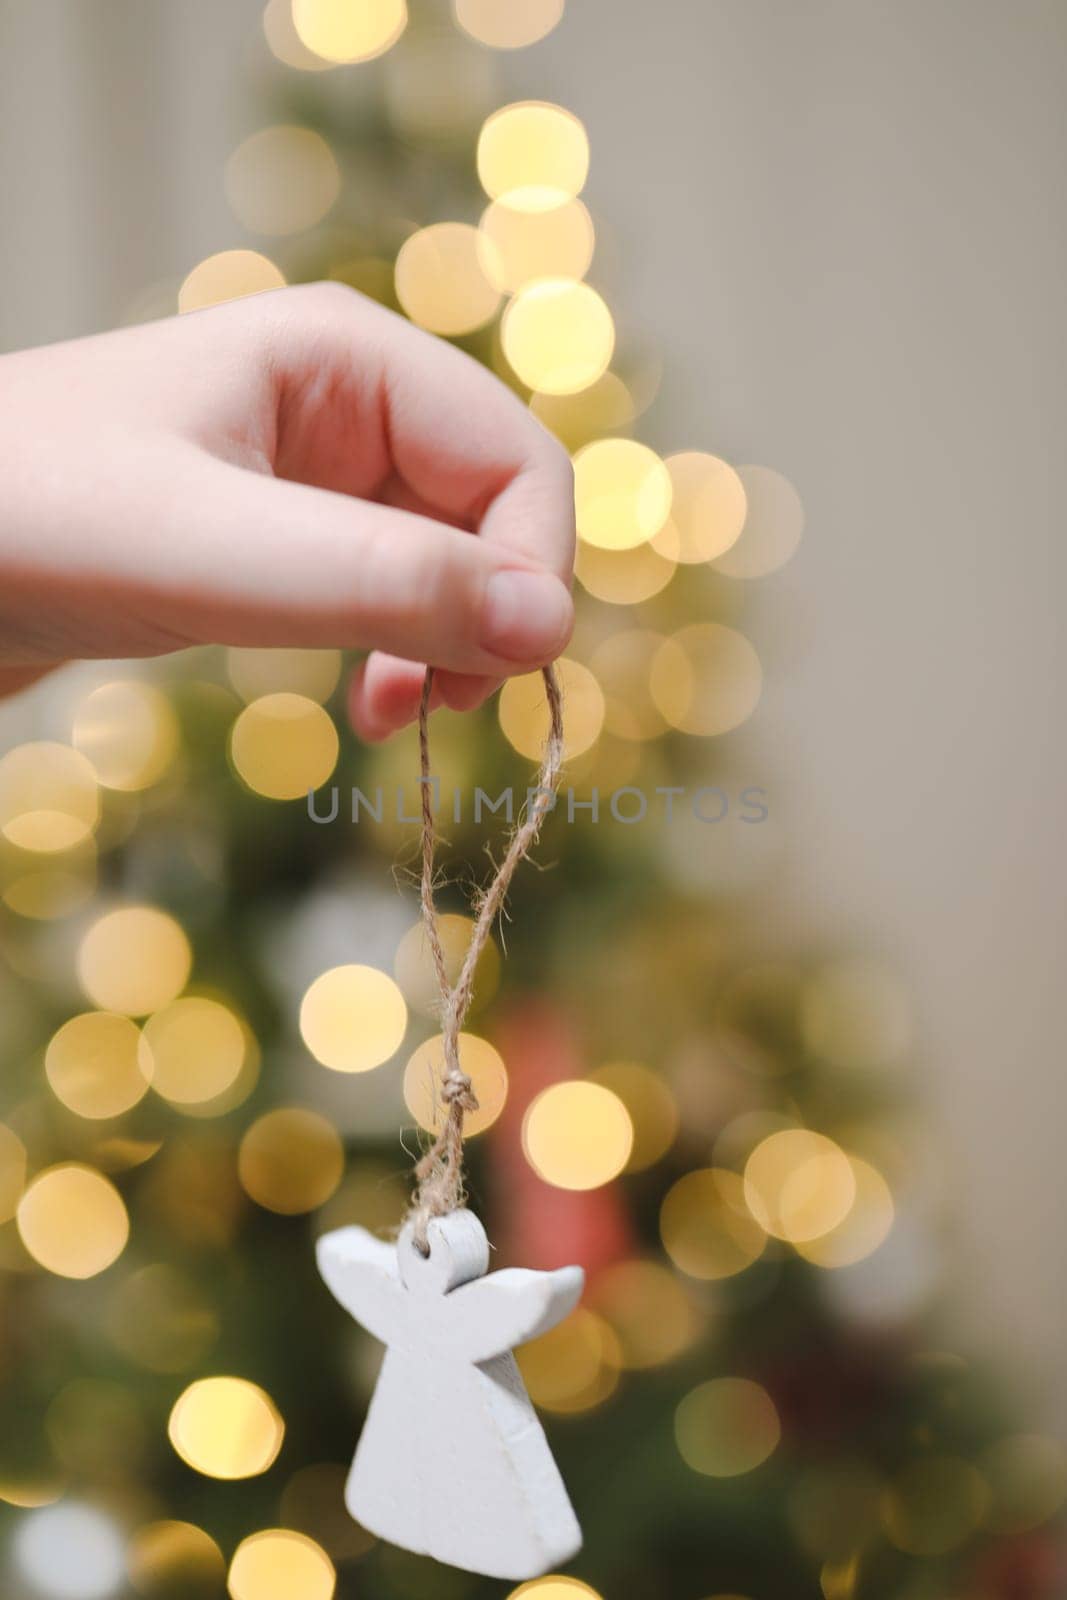 Decorating Christmas tree, hand holding Christmas toy. Holiday, Christmas and New Year celebration concept by paralisart